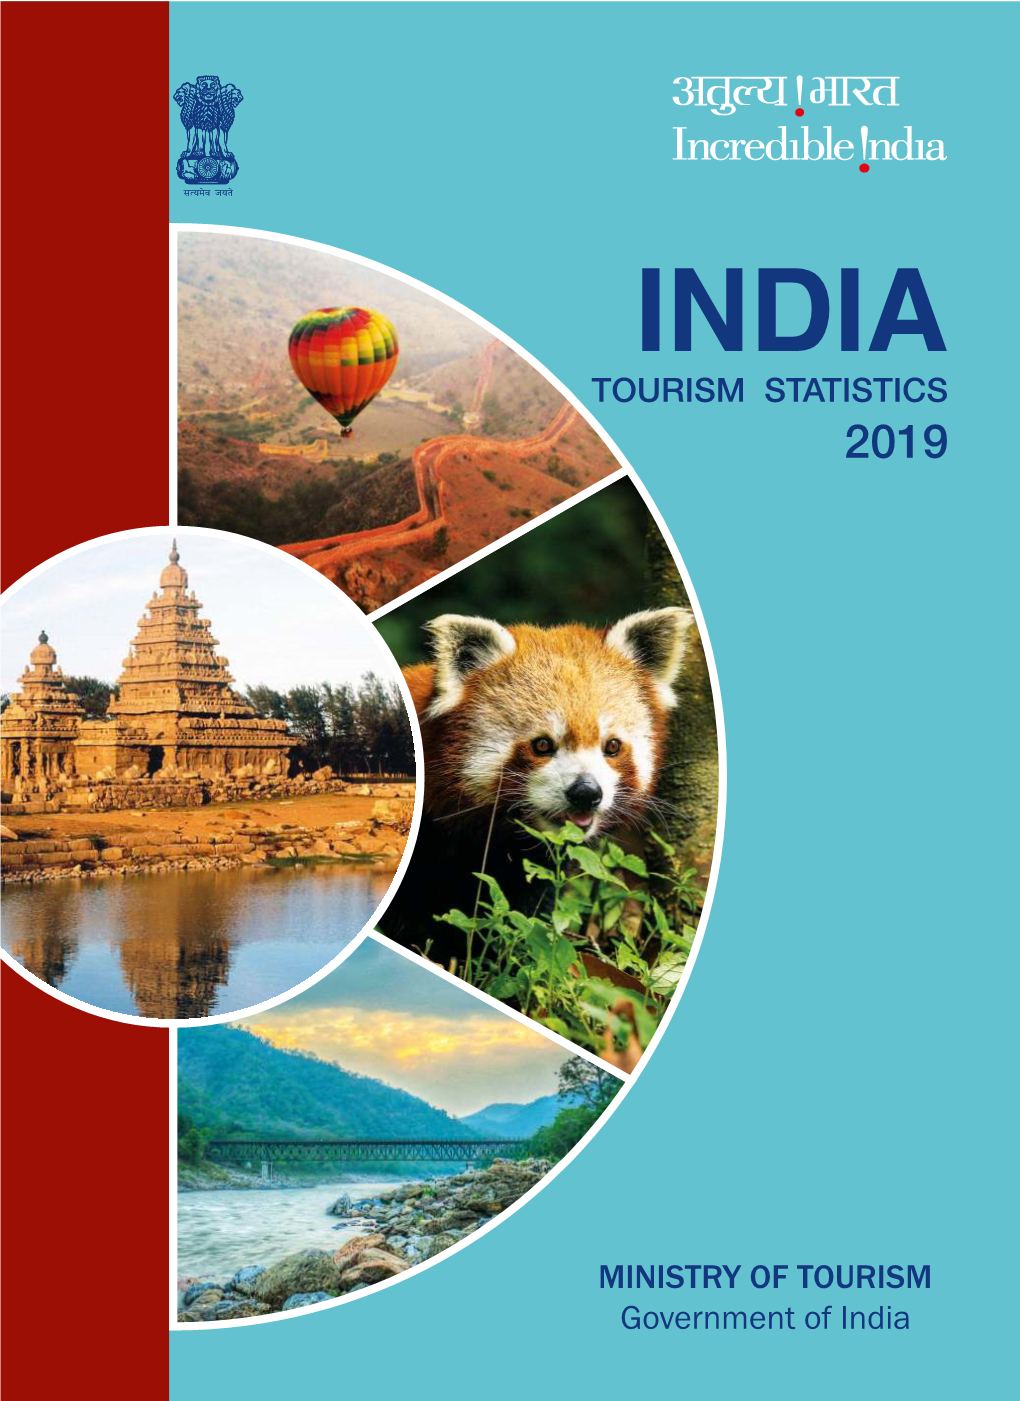 Official India Tourism Statistics for 2019